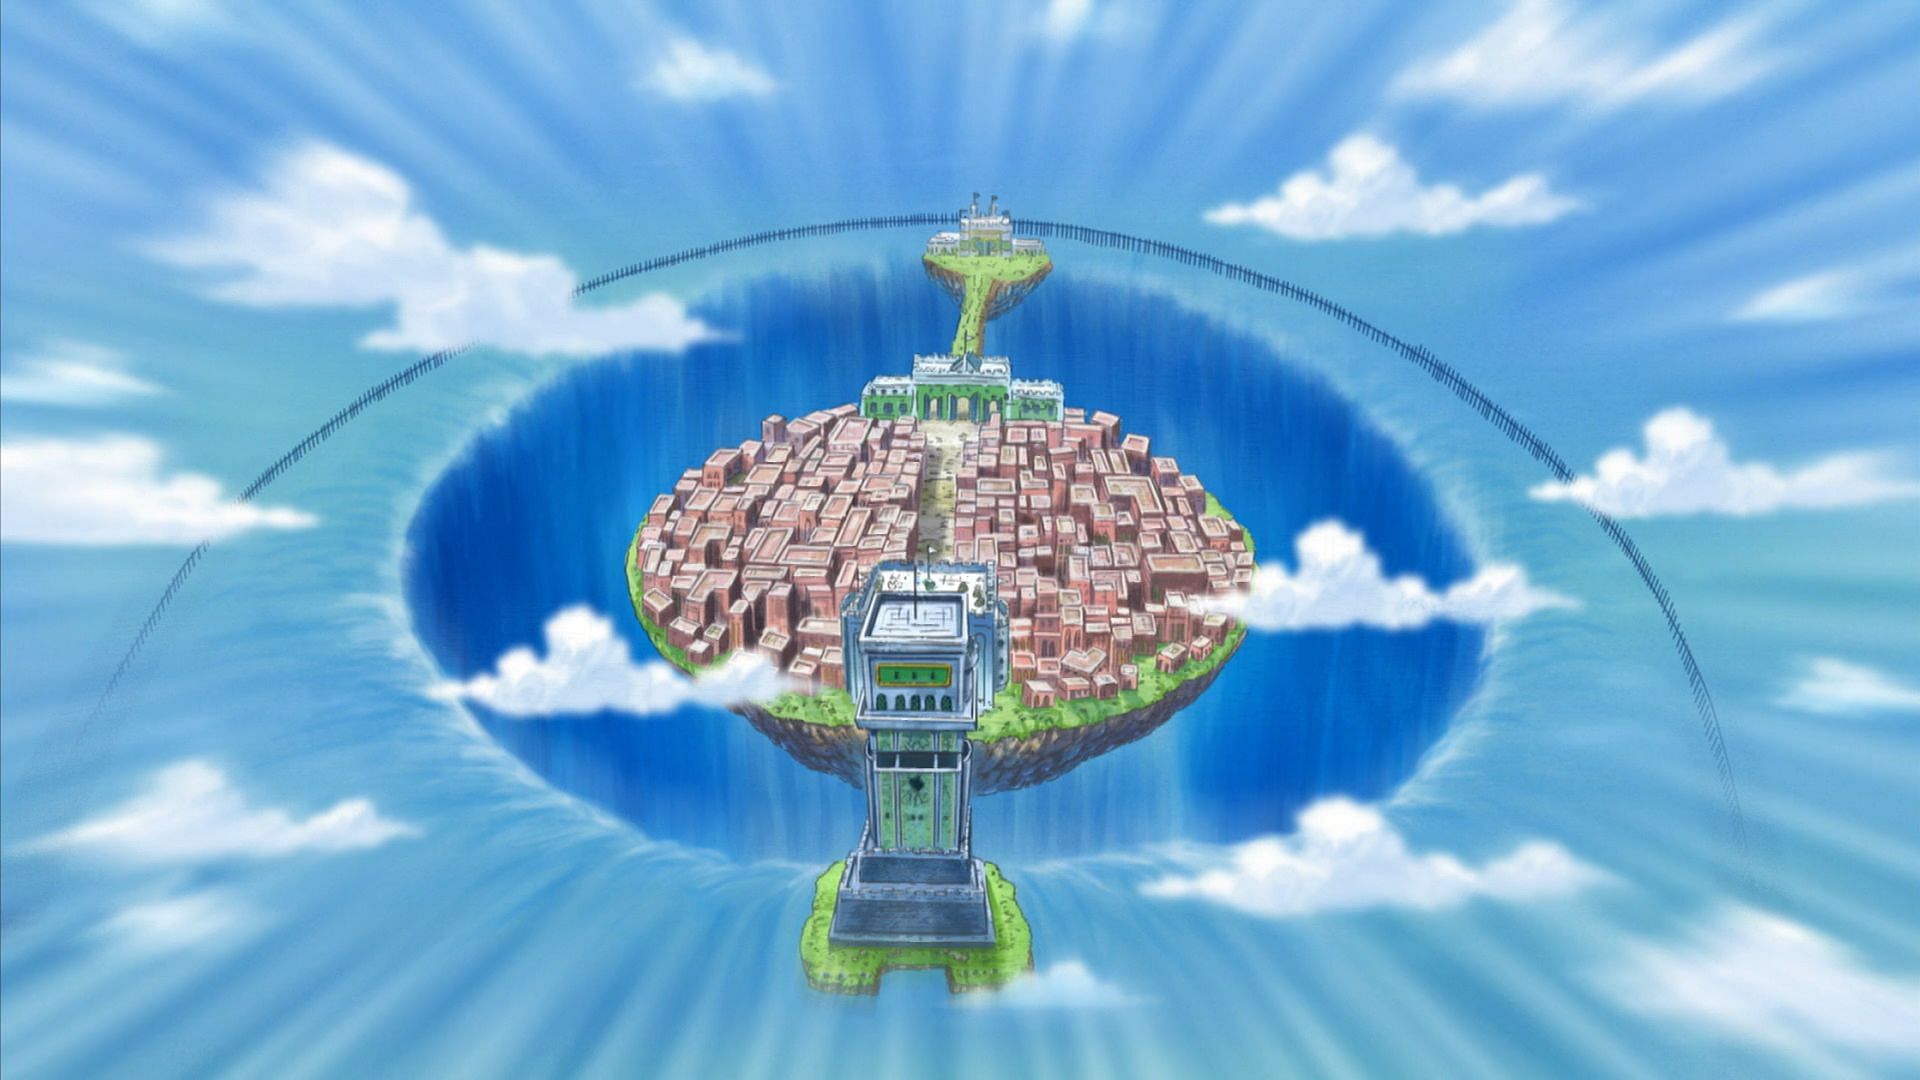 Enies Lobby as seen in the series&#039; anime (Image via Toei Animation)